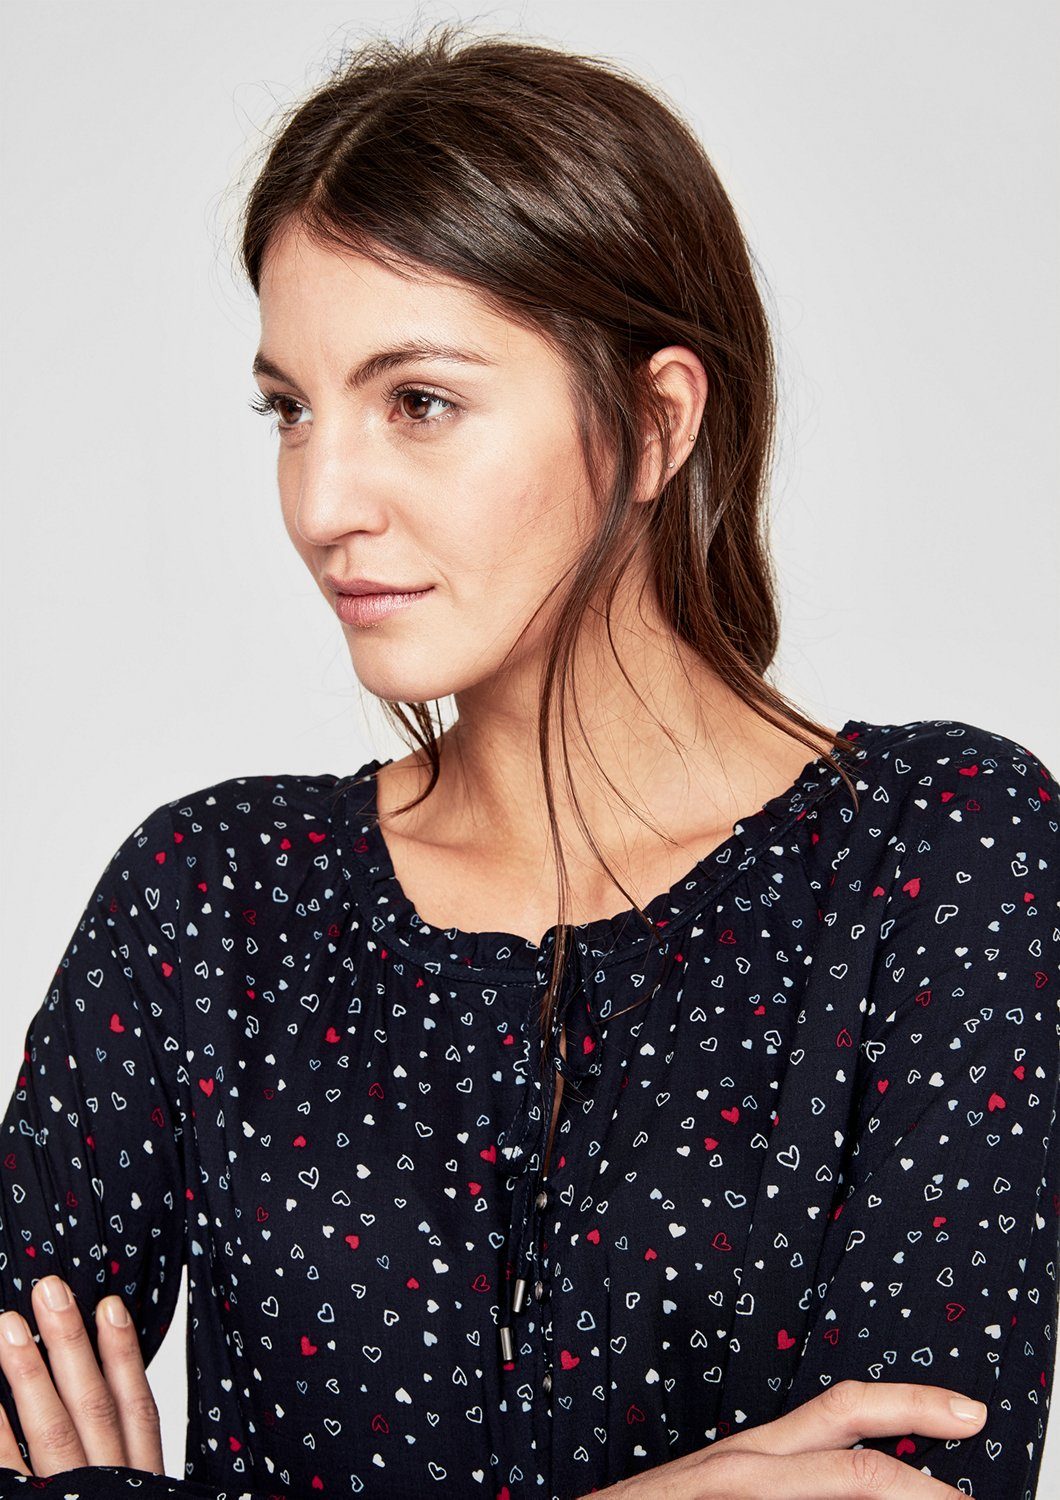 Otto - s.Oliver RED LABEL NU 15% KORTING: s.Oliver RED LABEL Blouse met motief all-over